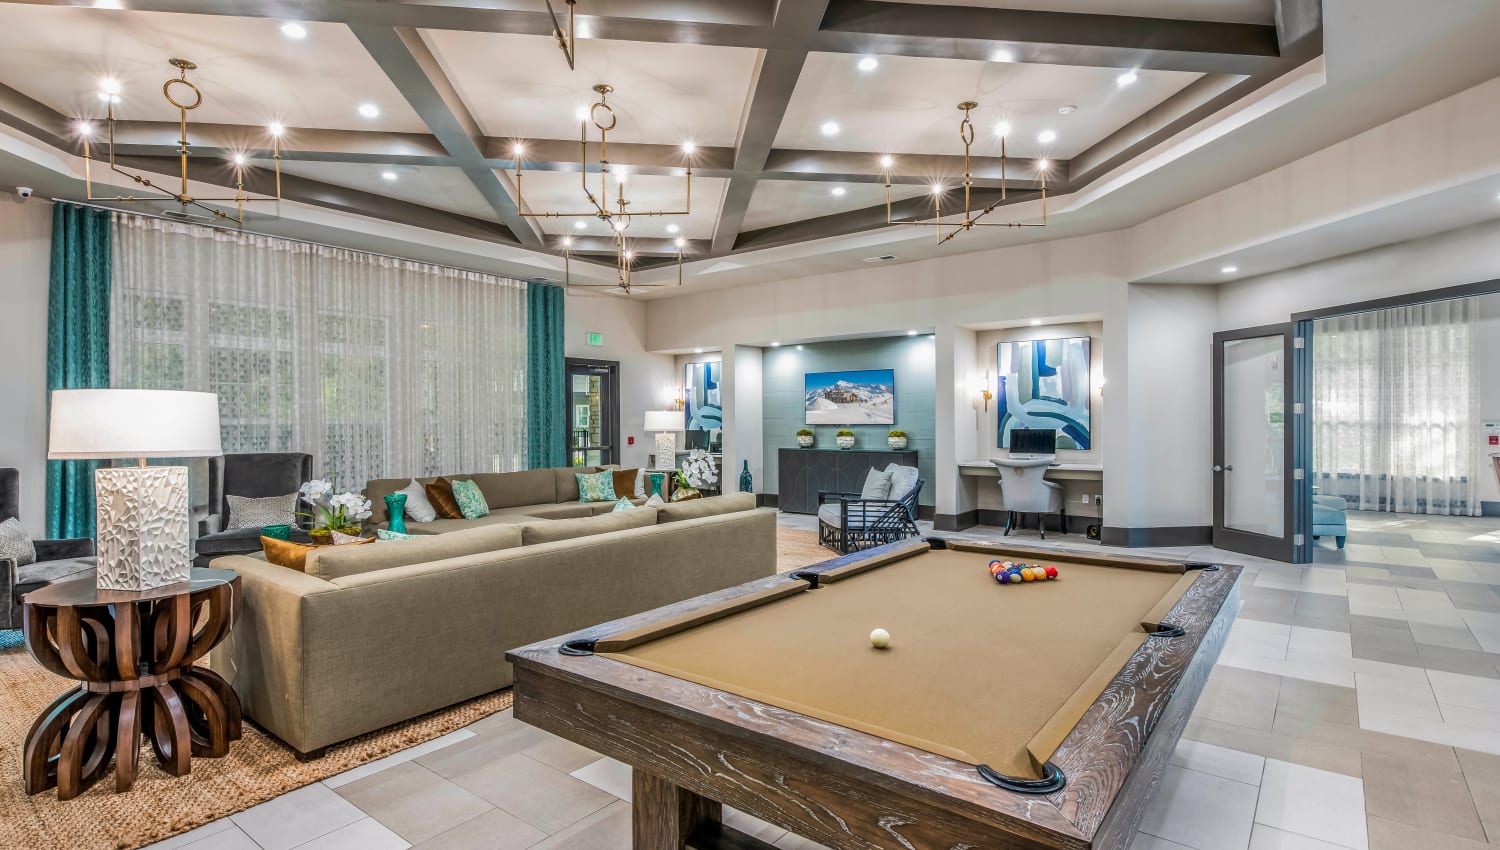 Billiards table and more in the game room at Canopy at Citrus Park in Tampa, Florida